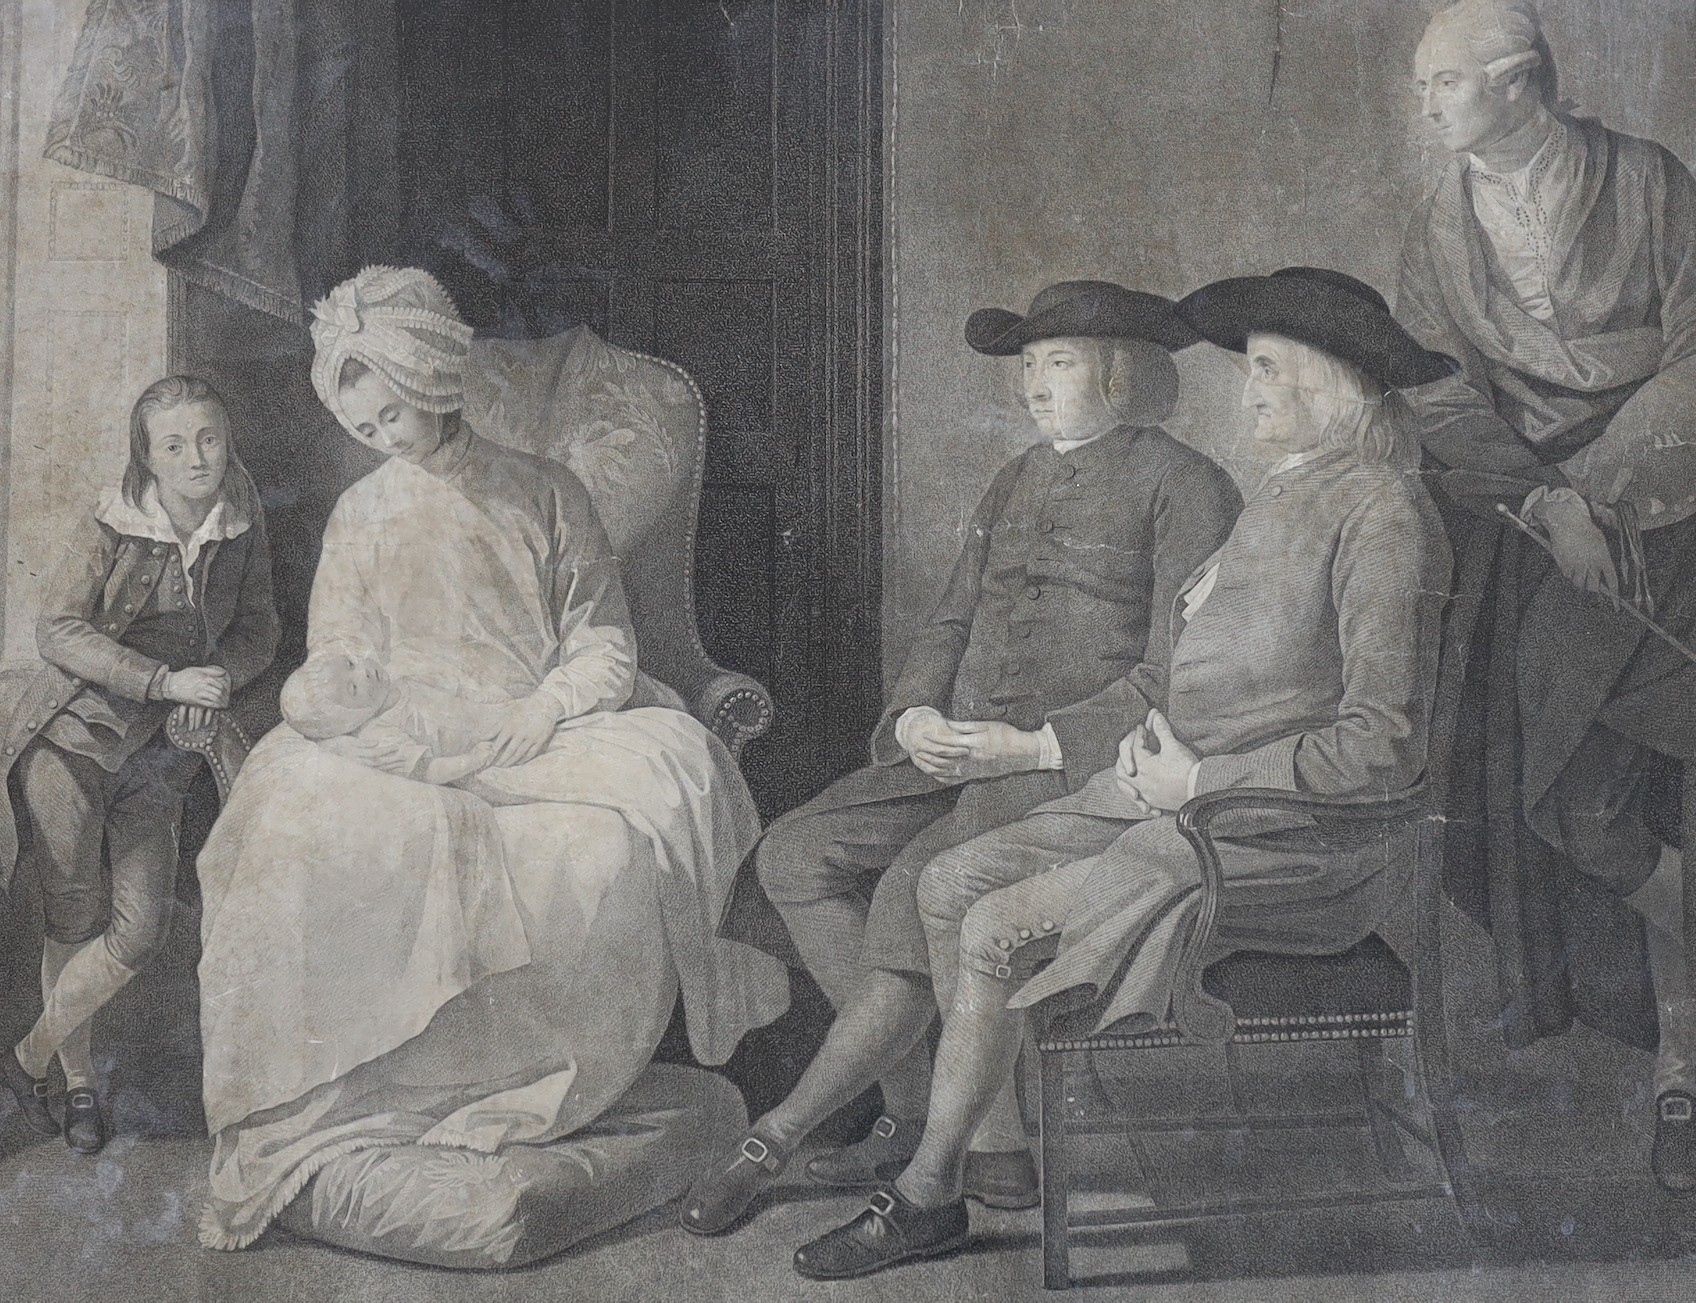 Facius after Benjamin West, copper engraving, 'Mr West and Family', overall 54 x 67cm